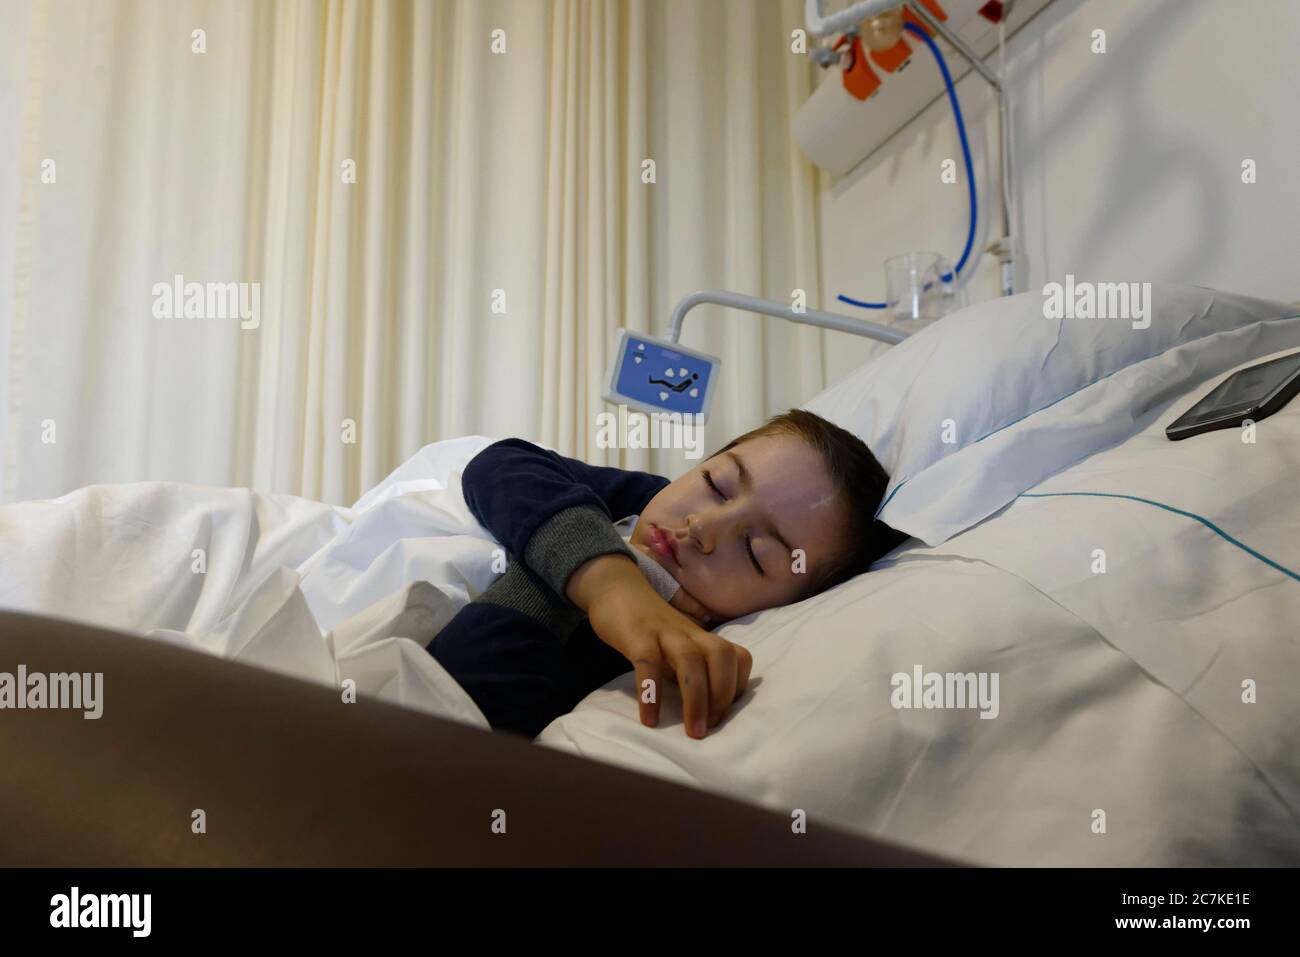 toddler (4 years old) sleeping in a hospital bed Stock Photo